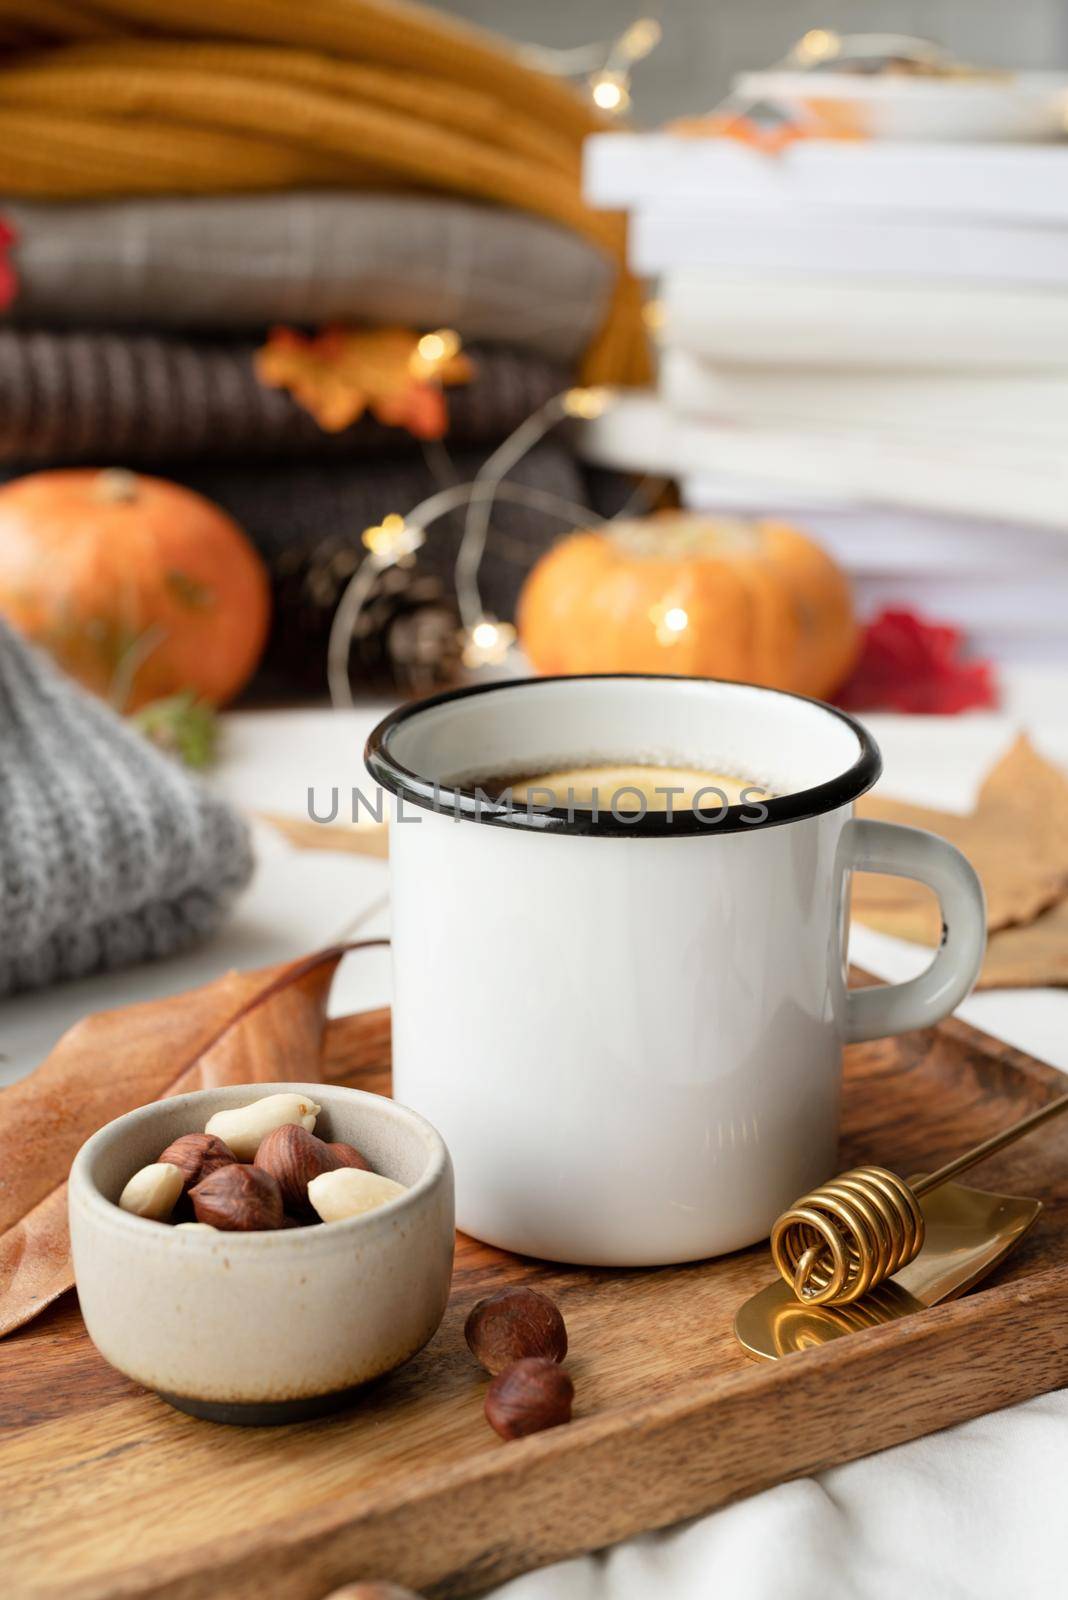 Cozy autumn composition, sweater weather. Hot tea with lemon and nuts on wooden tray surrounded with autumn leaves and sweaters, mug mockup design by Desperada